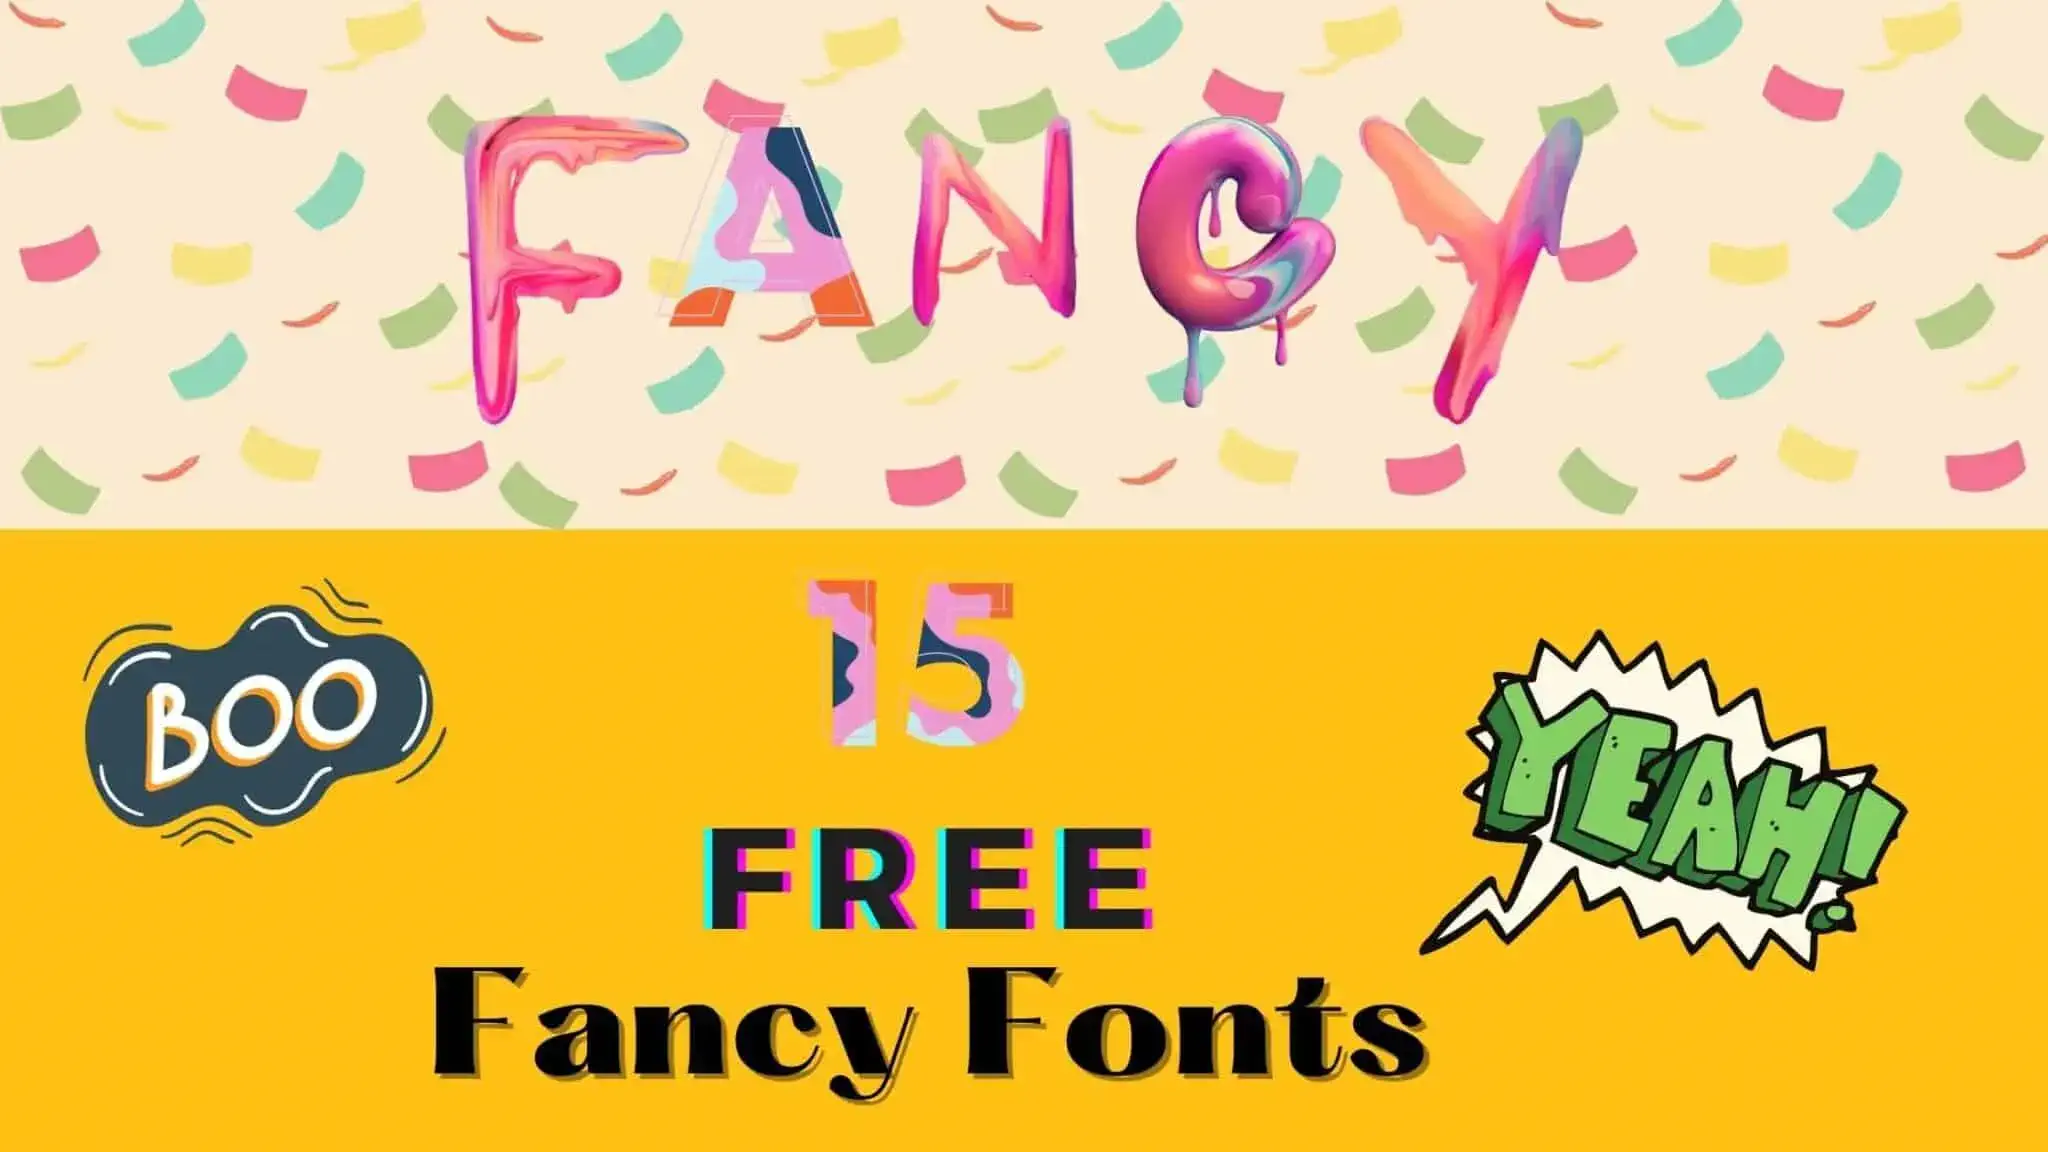 15 Free Fancy Fonts For Graphic Design